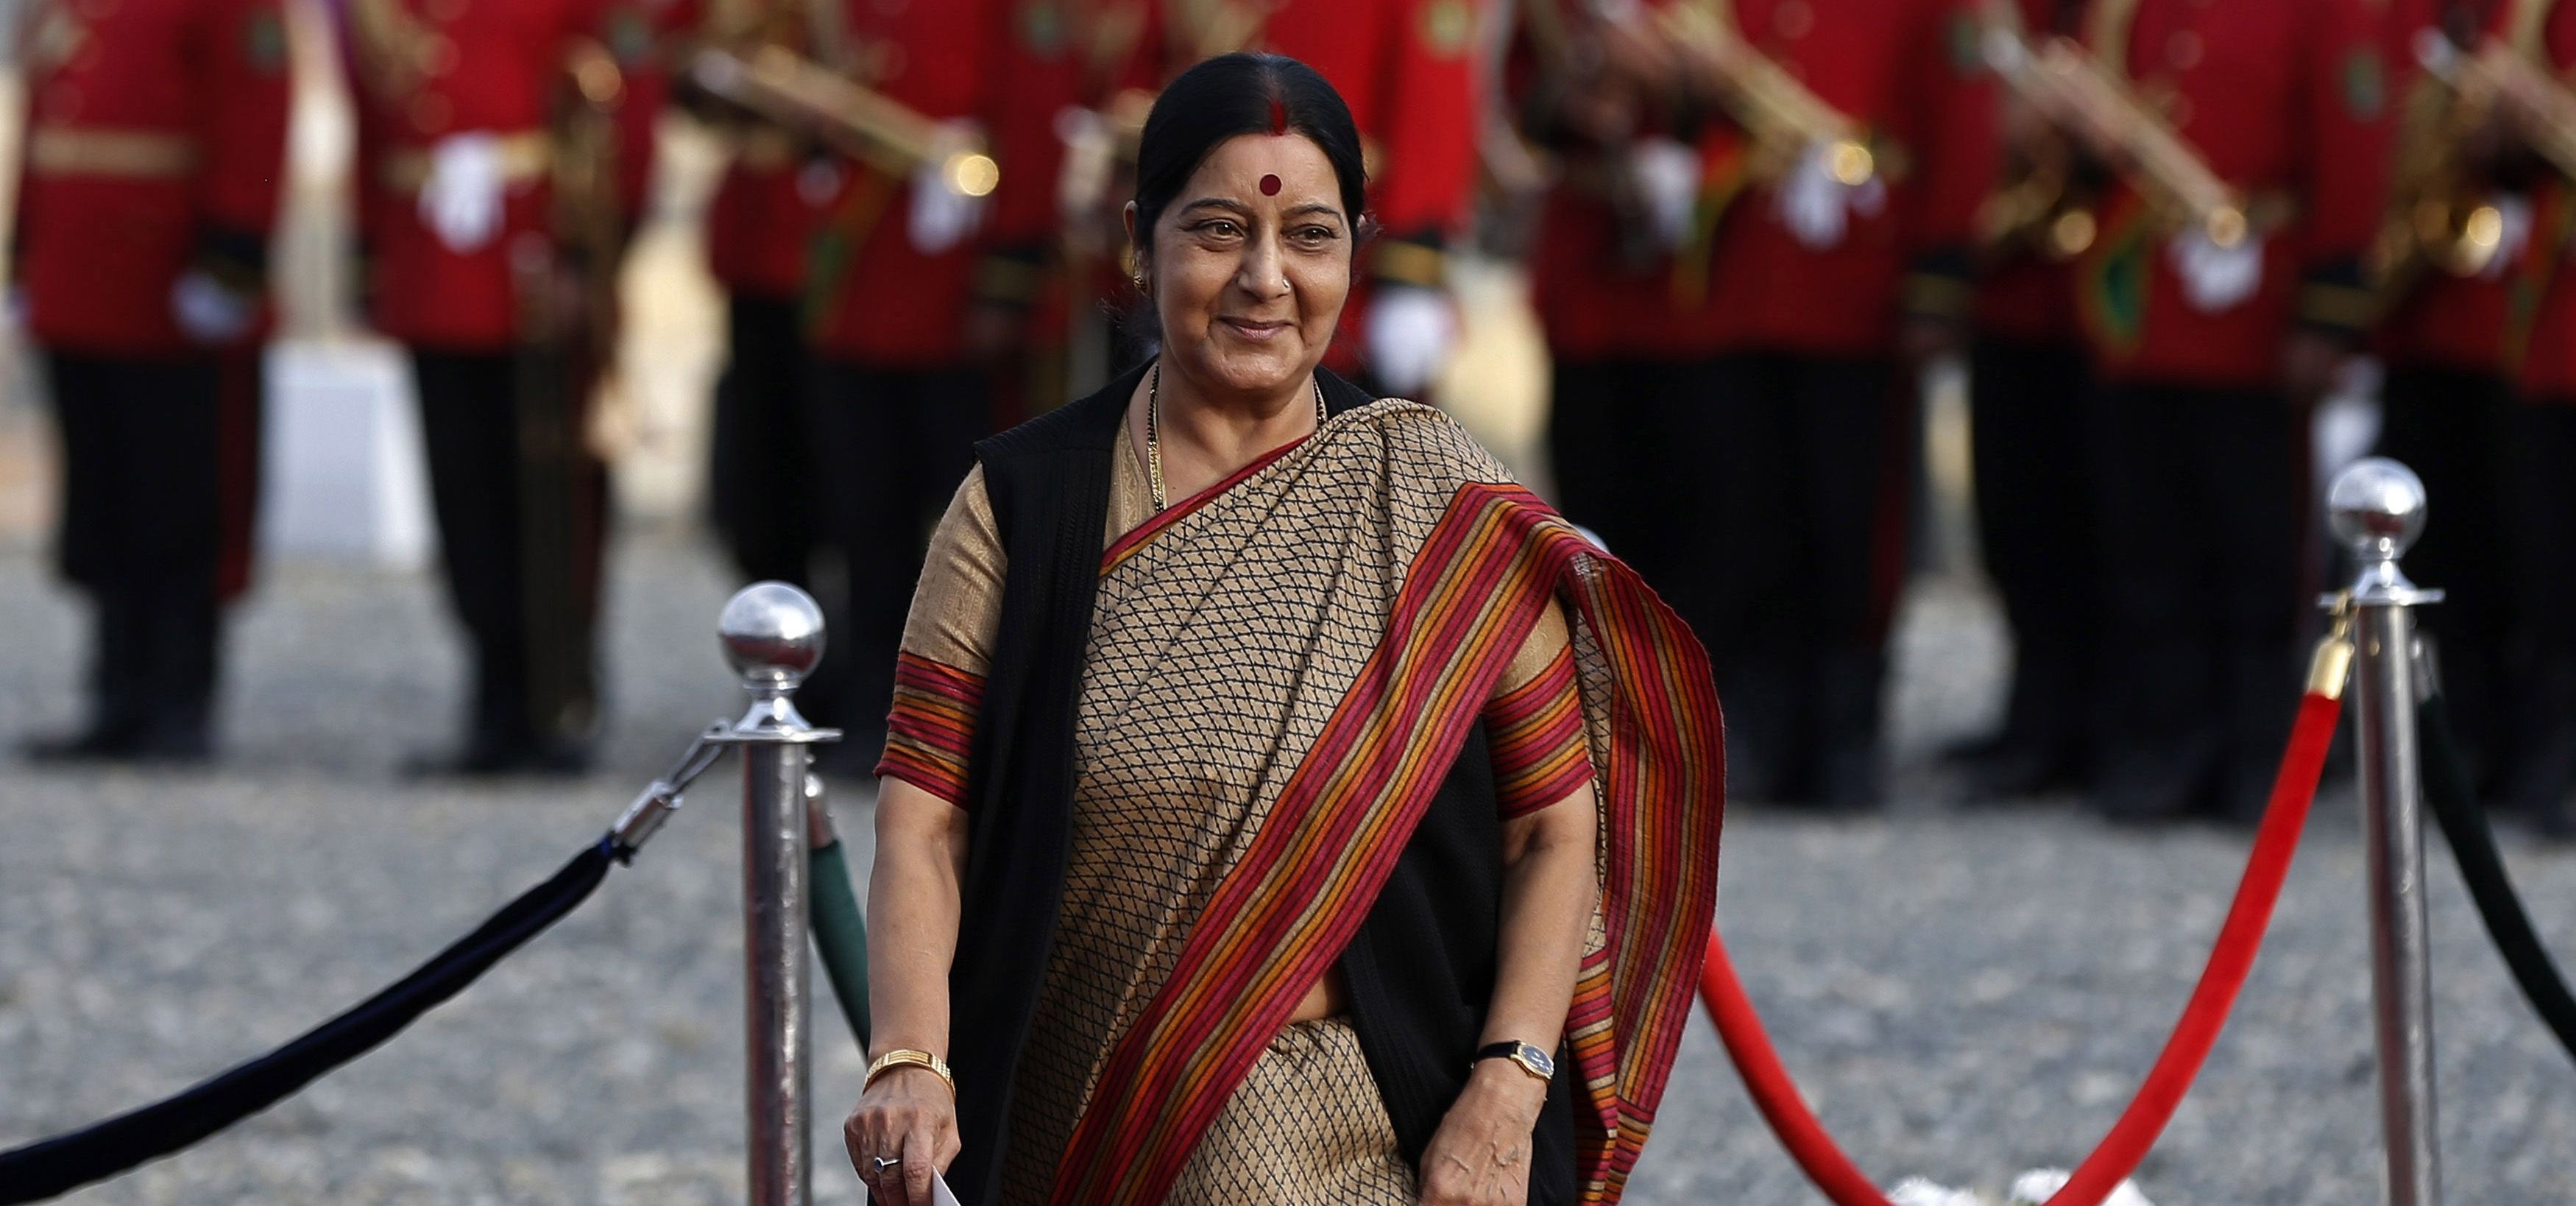 Indias Most Popular Foreign Minister Sushma Swaraj Passes Away At 67 1011